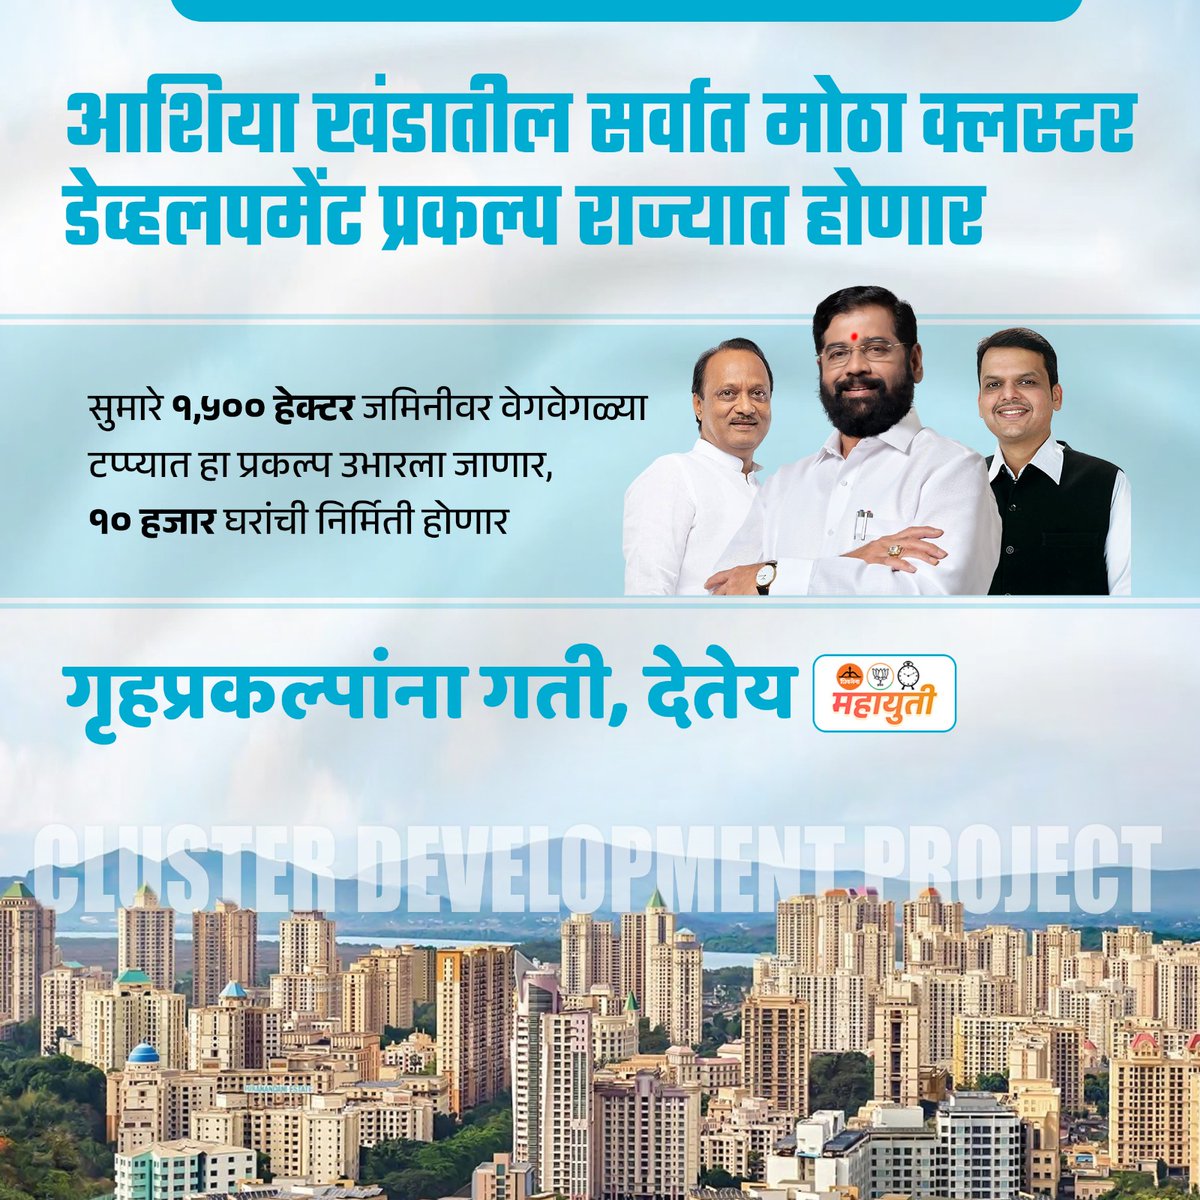 With the largest cluster development project in Asia on the horizon, CM Eknath Shinde Govt showcases visionary leadership in urban planning and housing infrastructure. A commendable effort towards building vibrant and resilient communities.